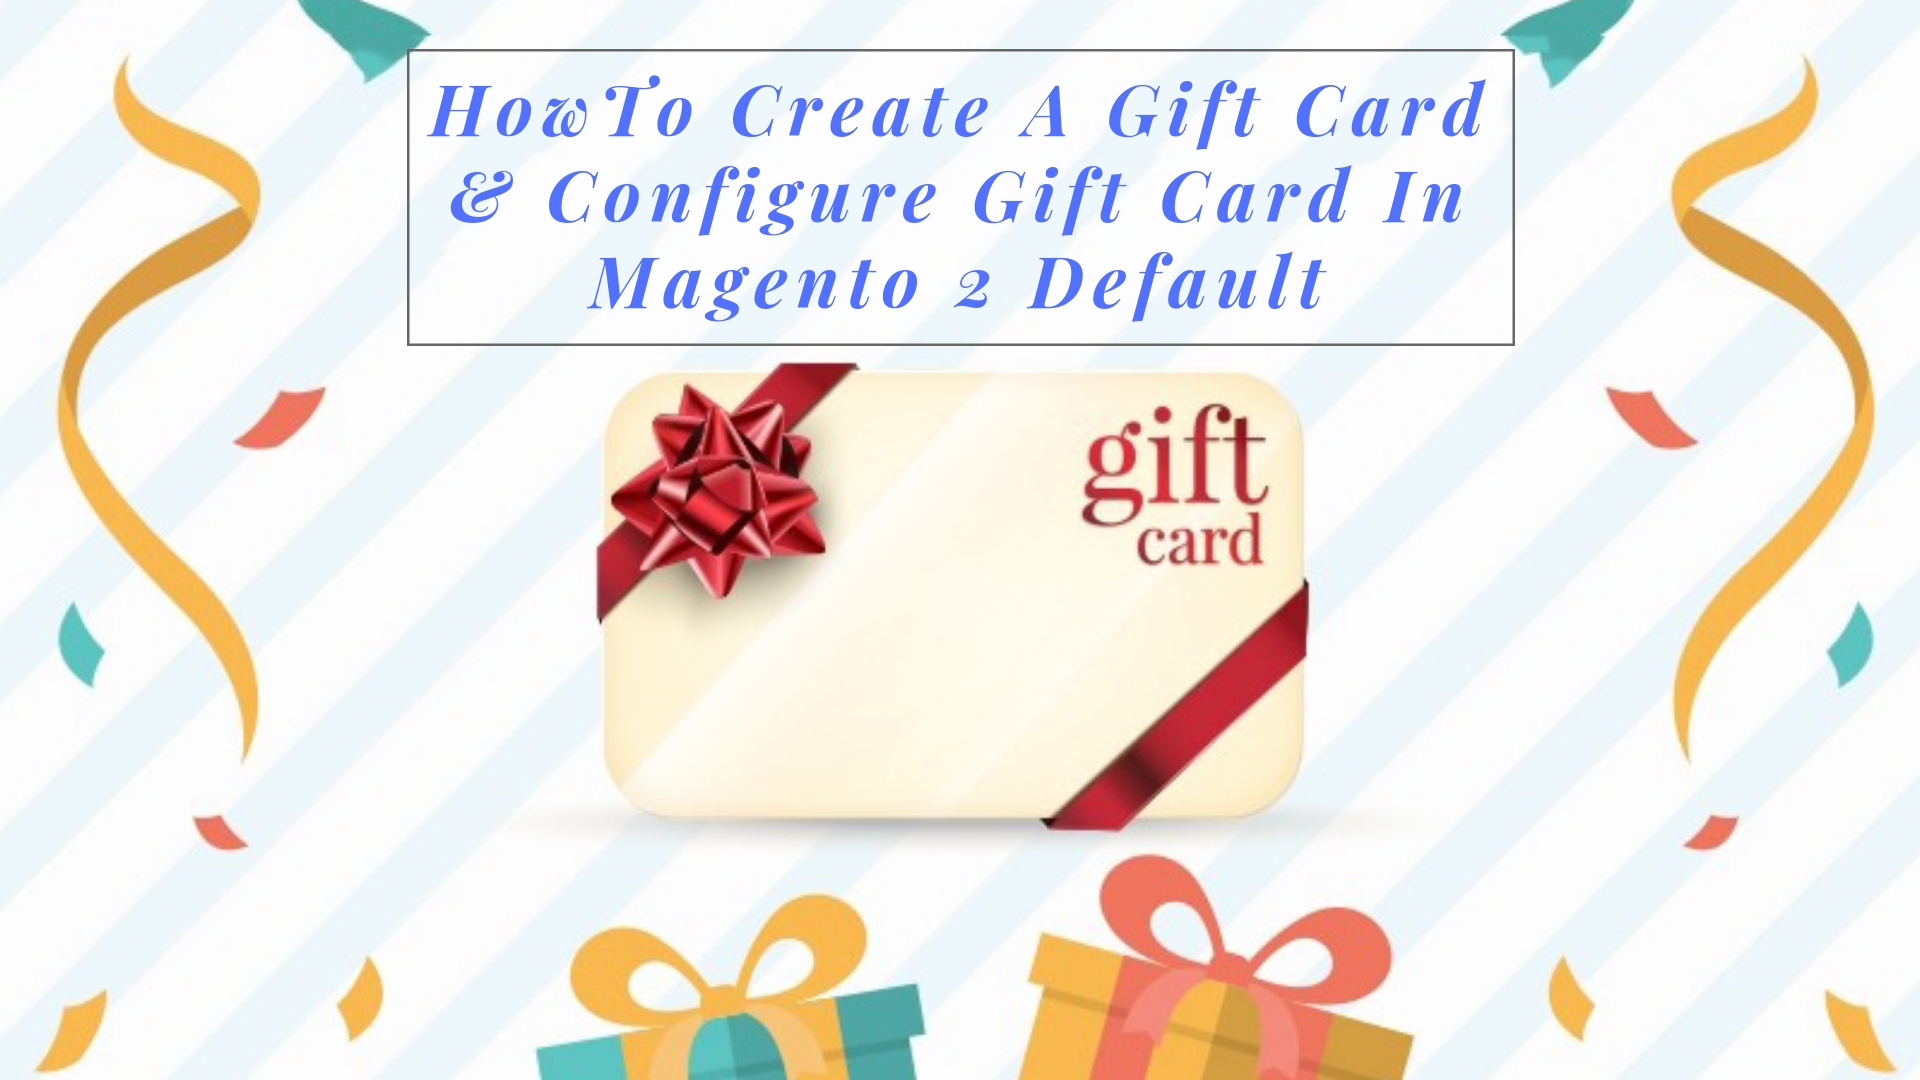 How to create a gift card & configure gift card in Magento 2 default